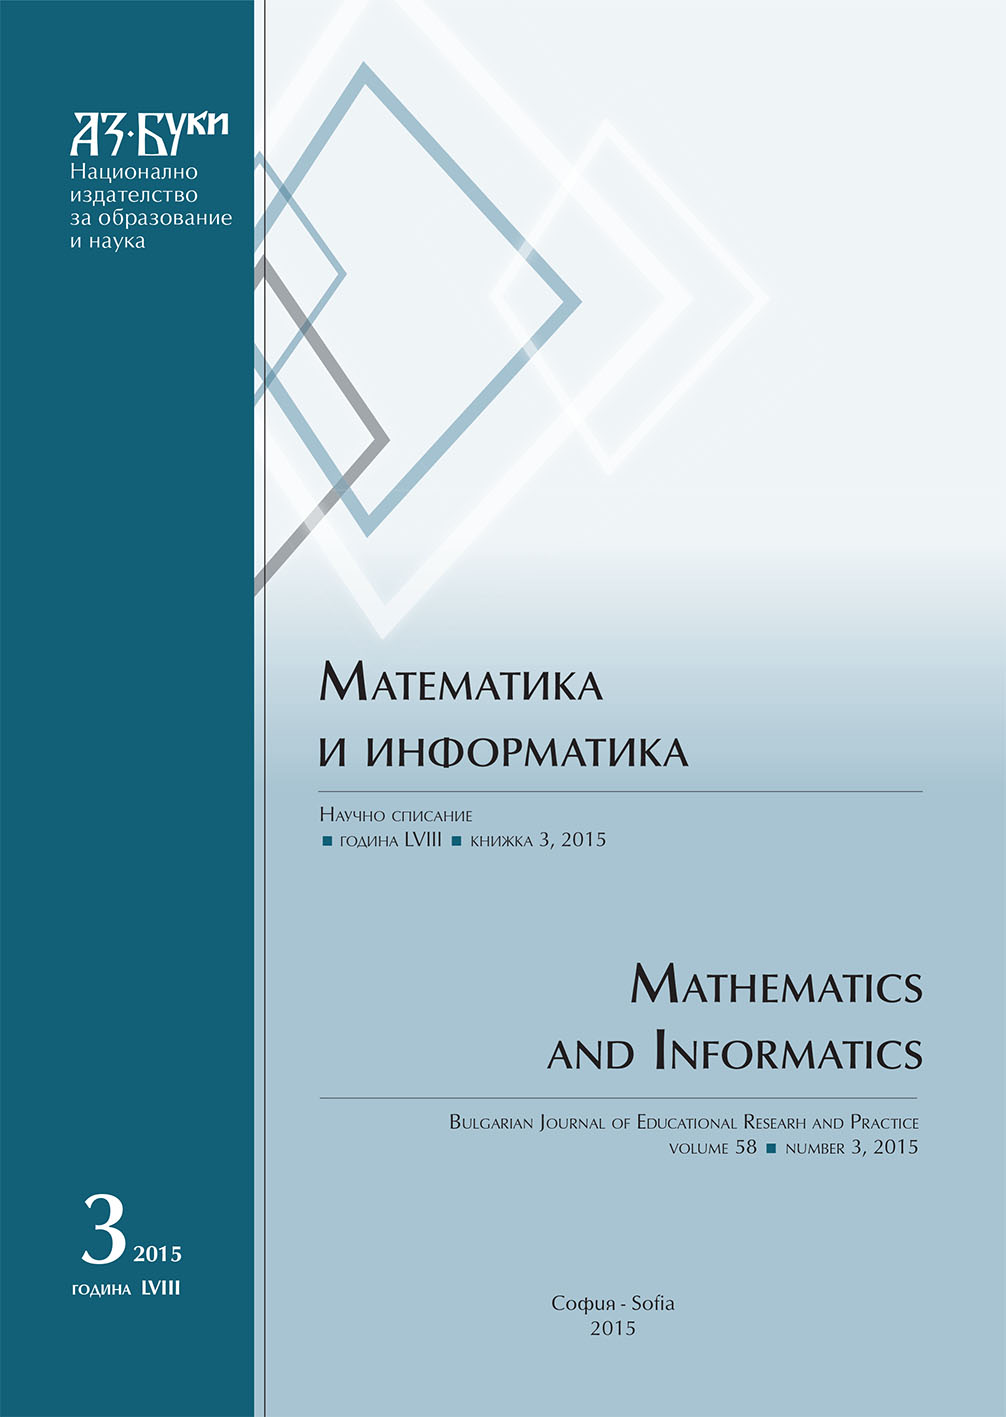 Comparative Analysis Regarding the Study of Transformations in the Euclidean Plane by Applying Complex Numbers Cover Image